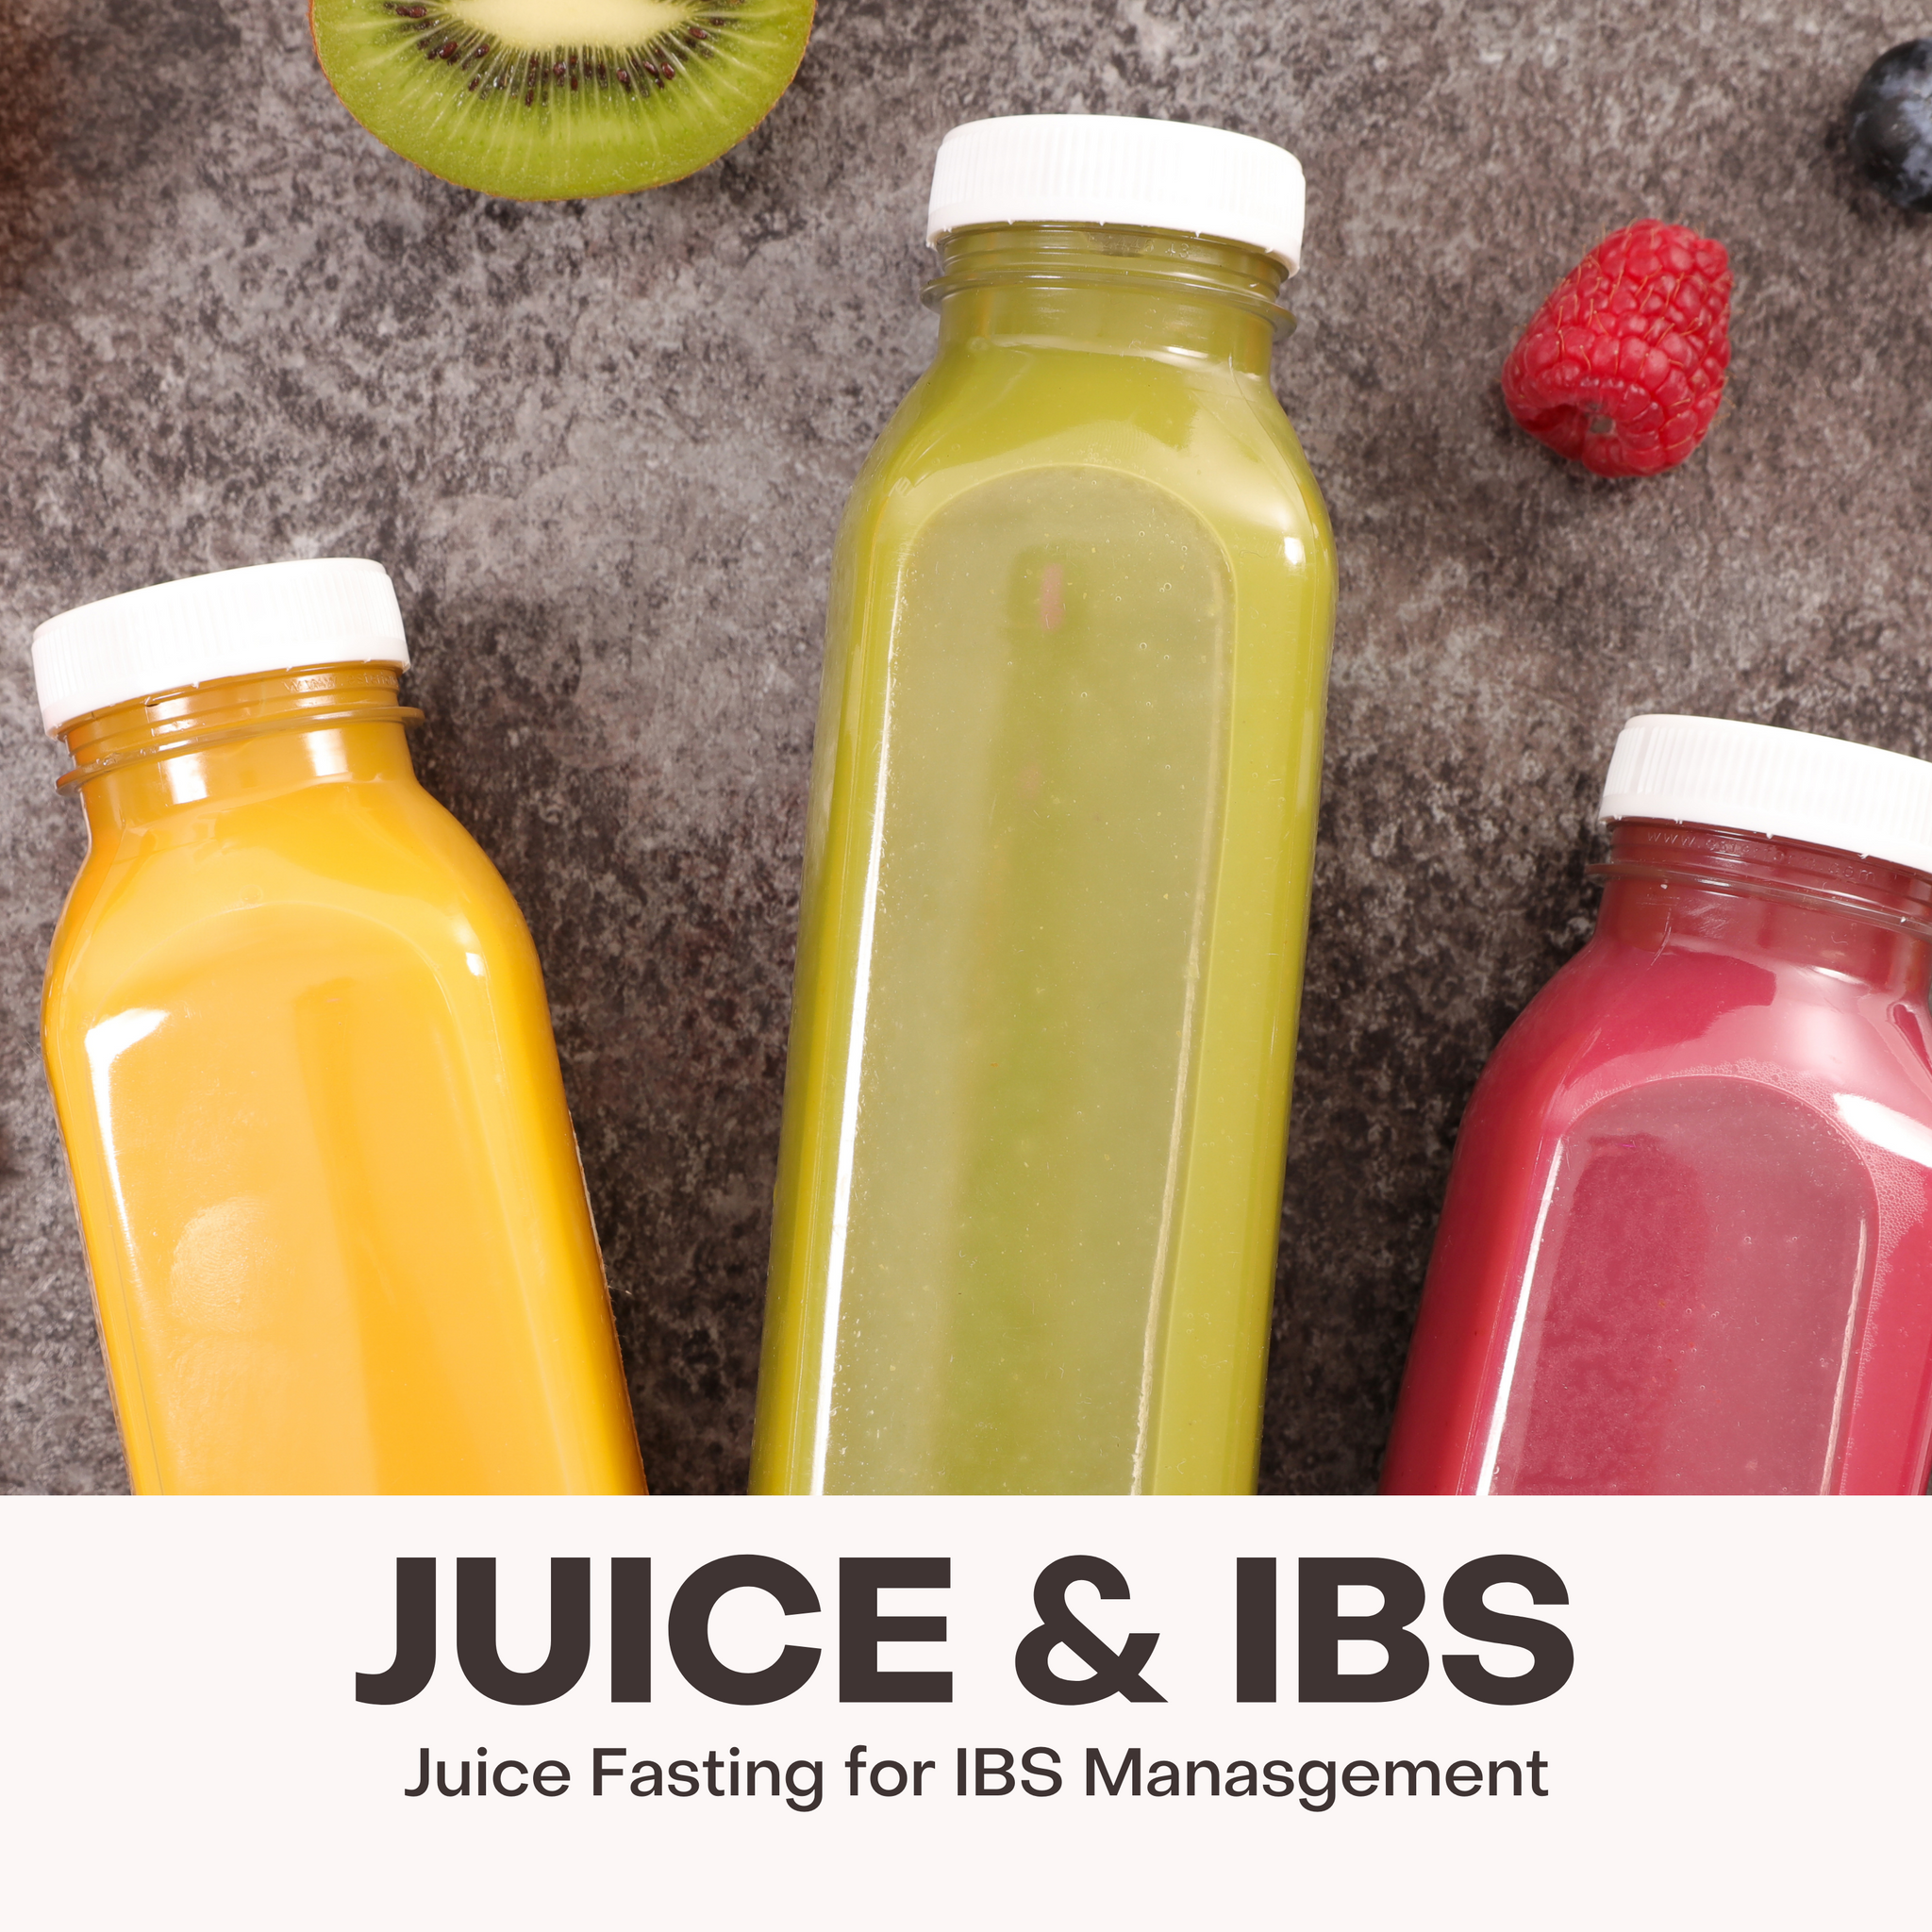 How Can Juice Fasting Help My IBS?